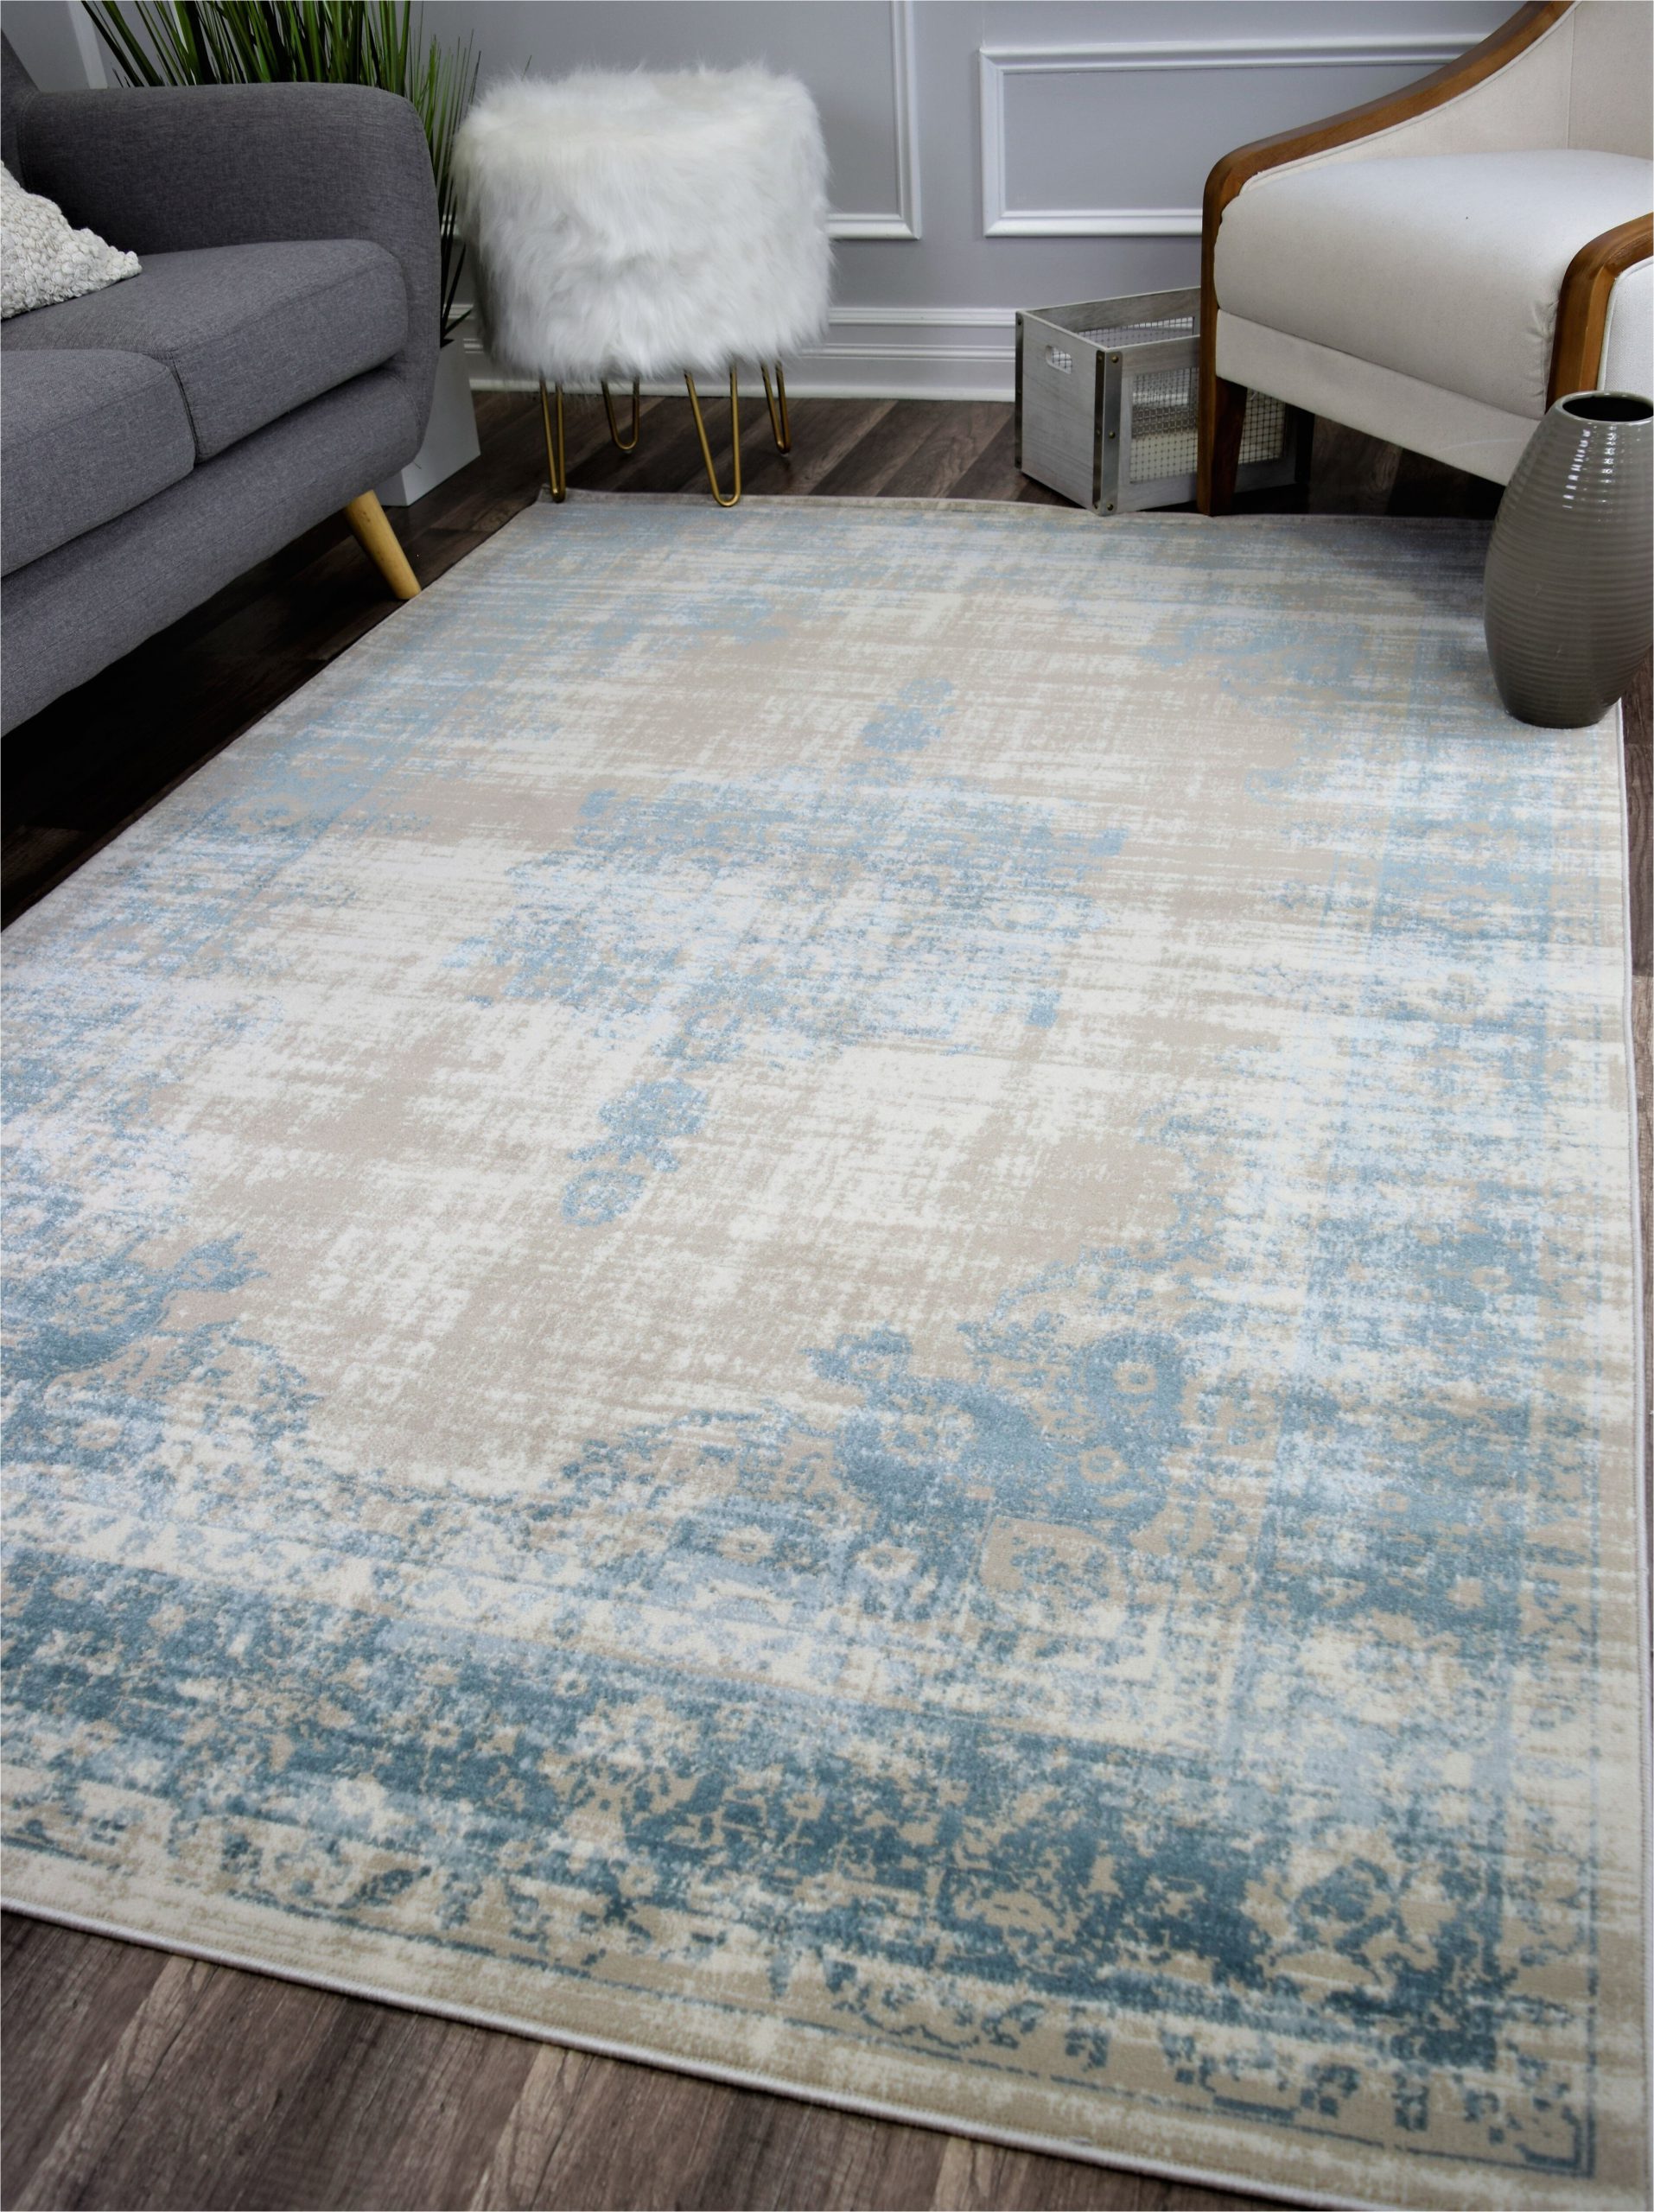 Area Rugs with Blue and Browns Donita Blue Brown area Rug